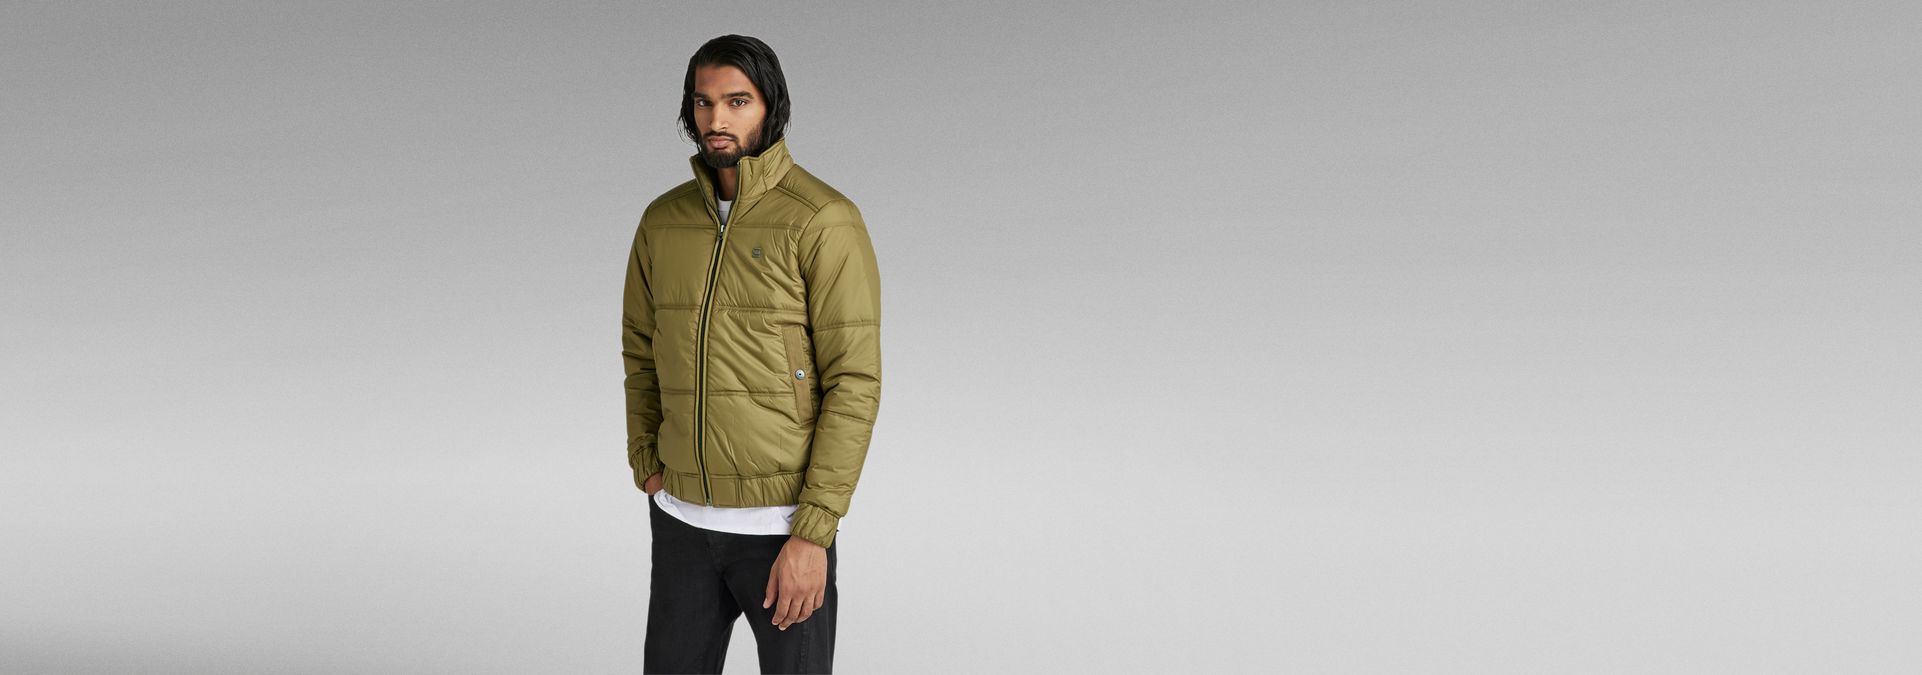 Meefic Quilted Jacket | Green | G-Star RAW®